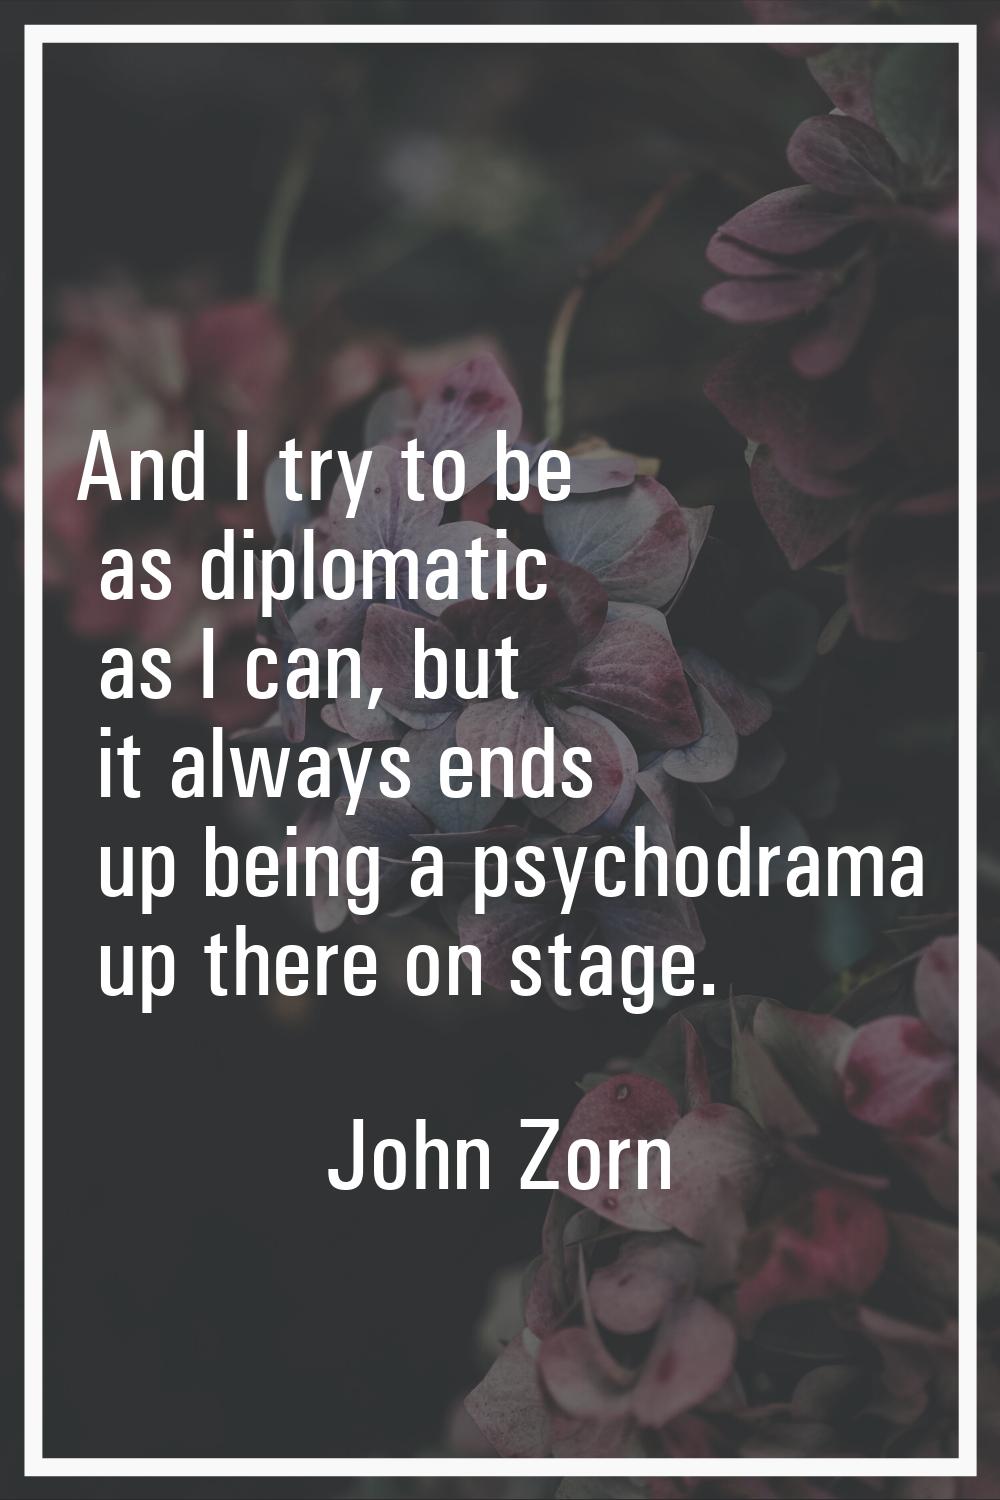 And I try to be as diplomatic as I can, but it always ends up being a psychodrama up there on stage